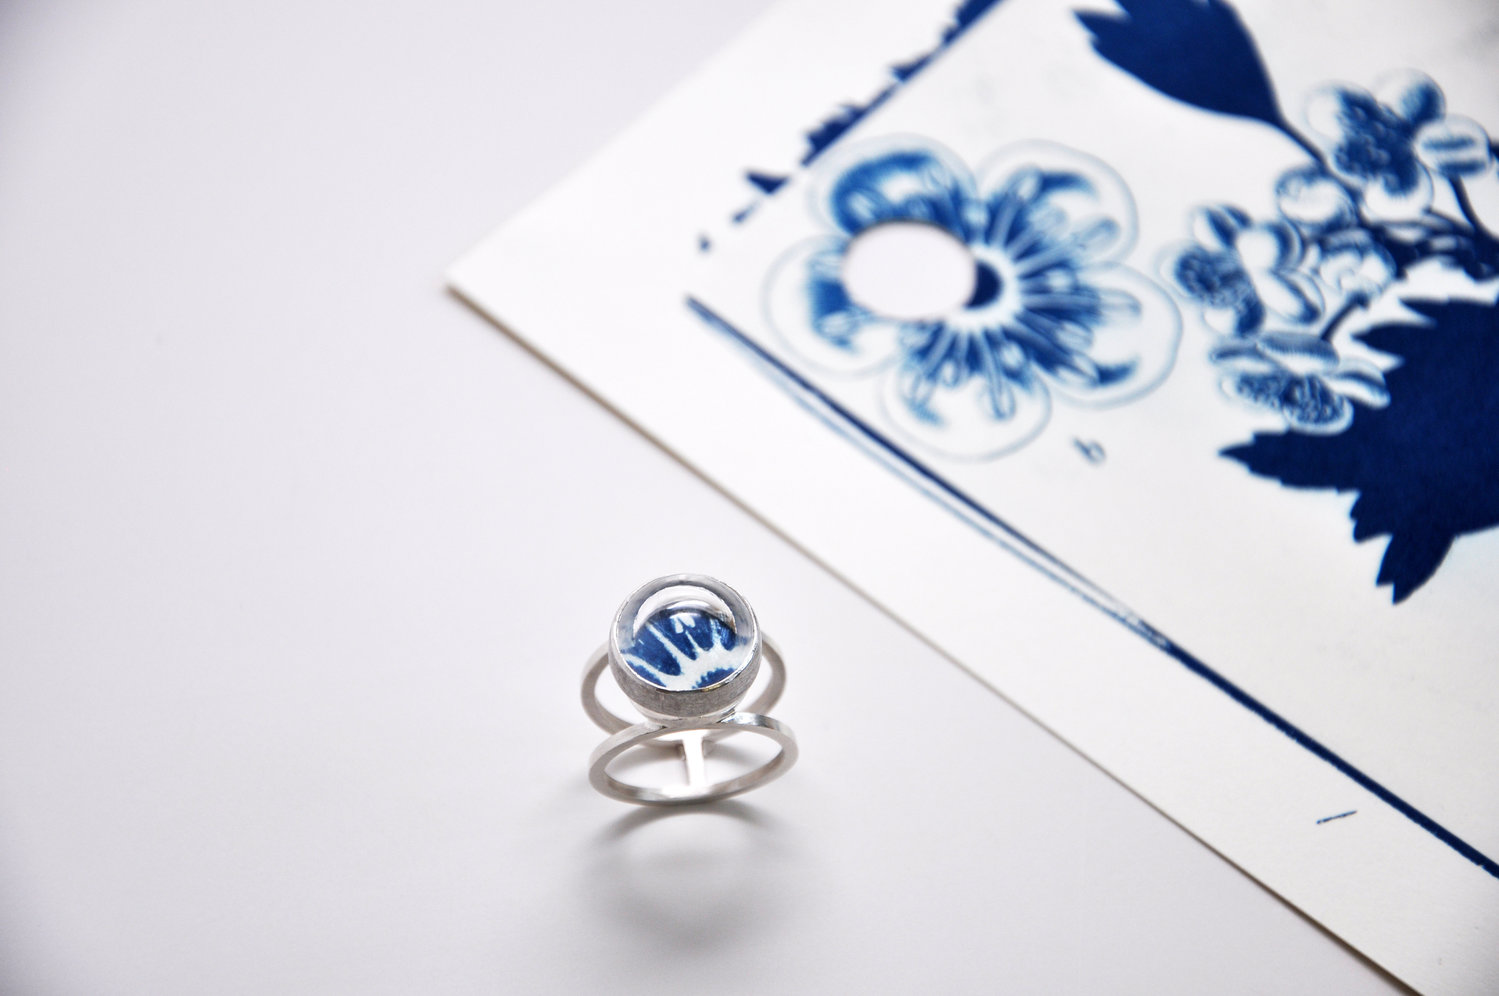 Reiss looked for interesting samples from the cyanotypes that would fit into a space small enough to be set on a ring, which she cut out. Each ring features a quartz rock crystal lens that magnifies the embedded botanical image.